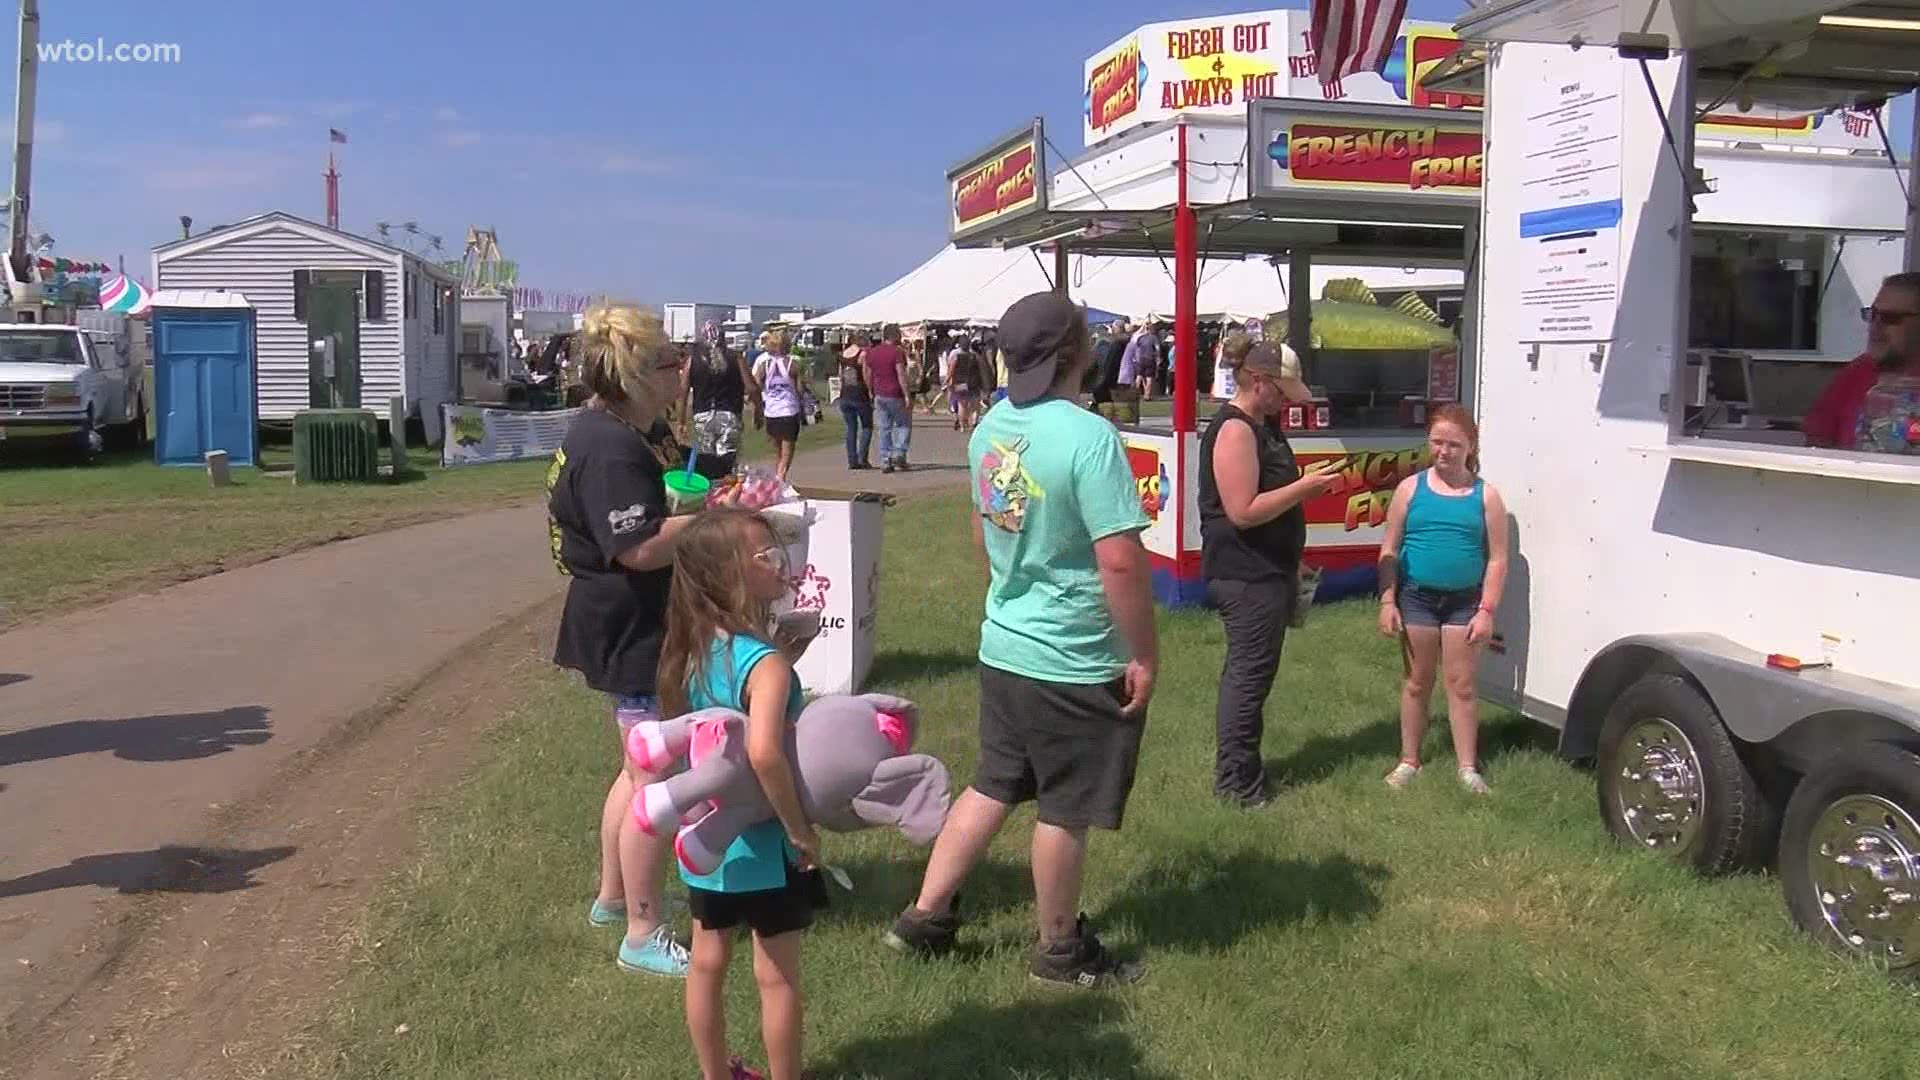 A week after flood waters from Lake Erie forced the annual festival to be postponed, hundreds flocked to Port Clinton this week to support the event.